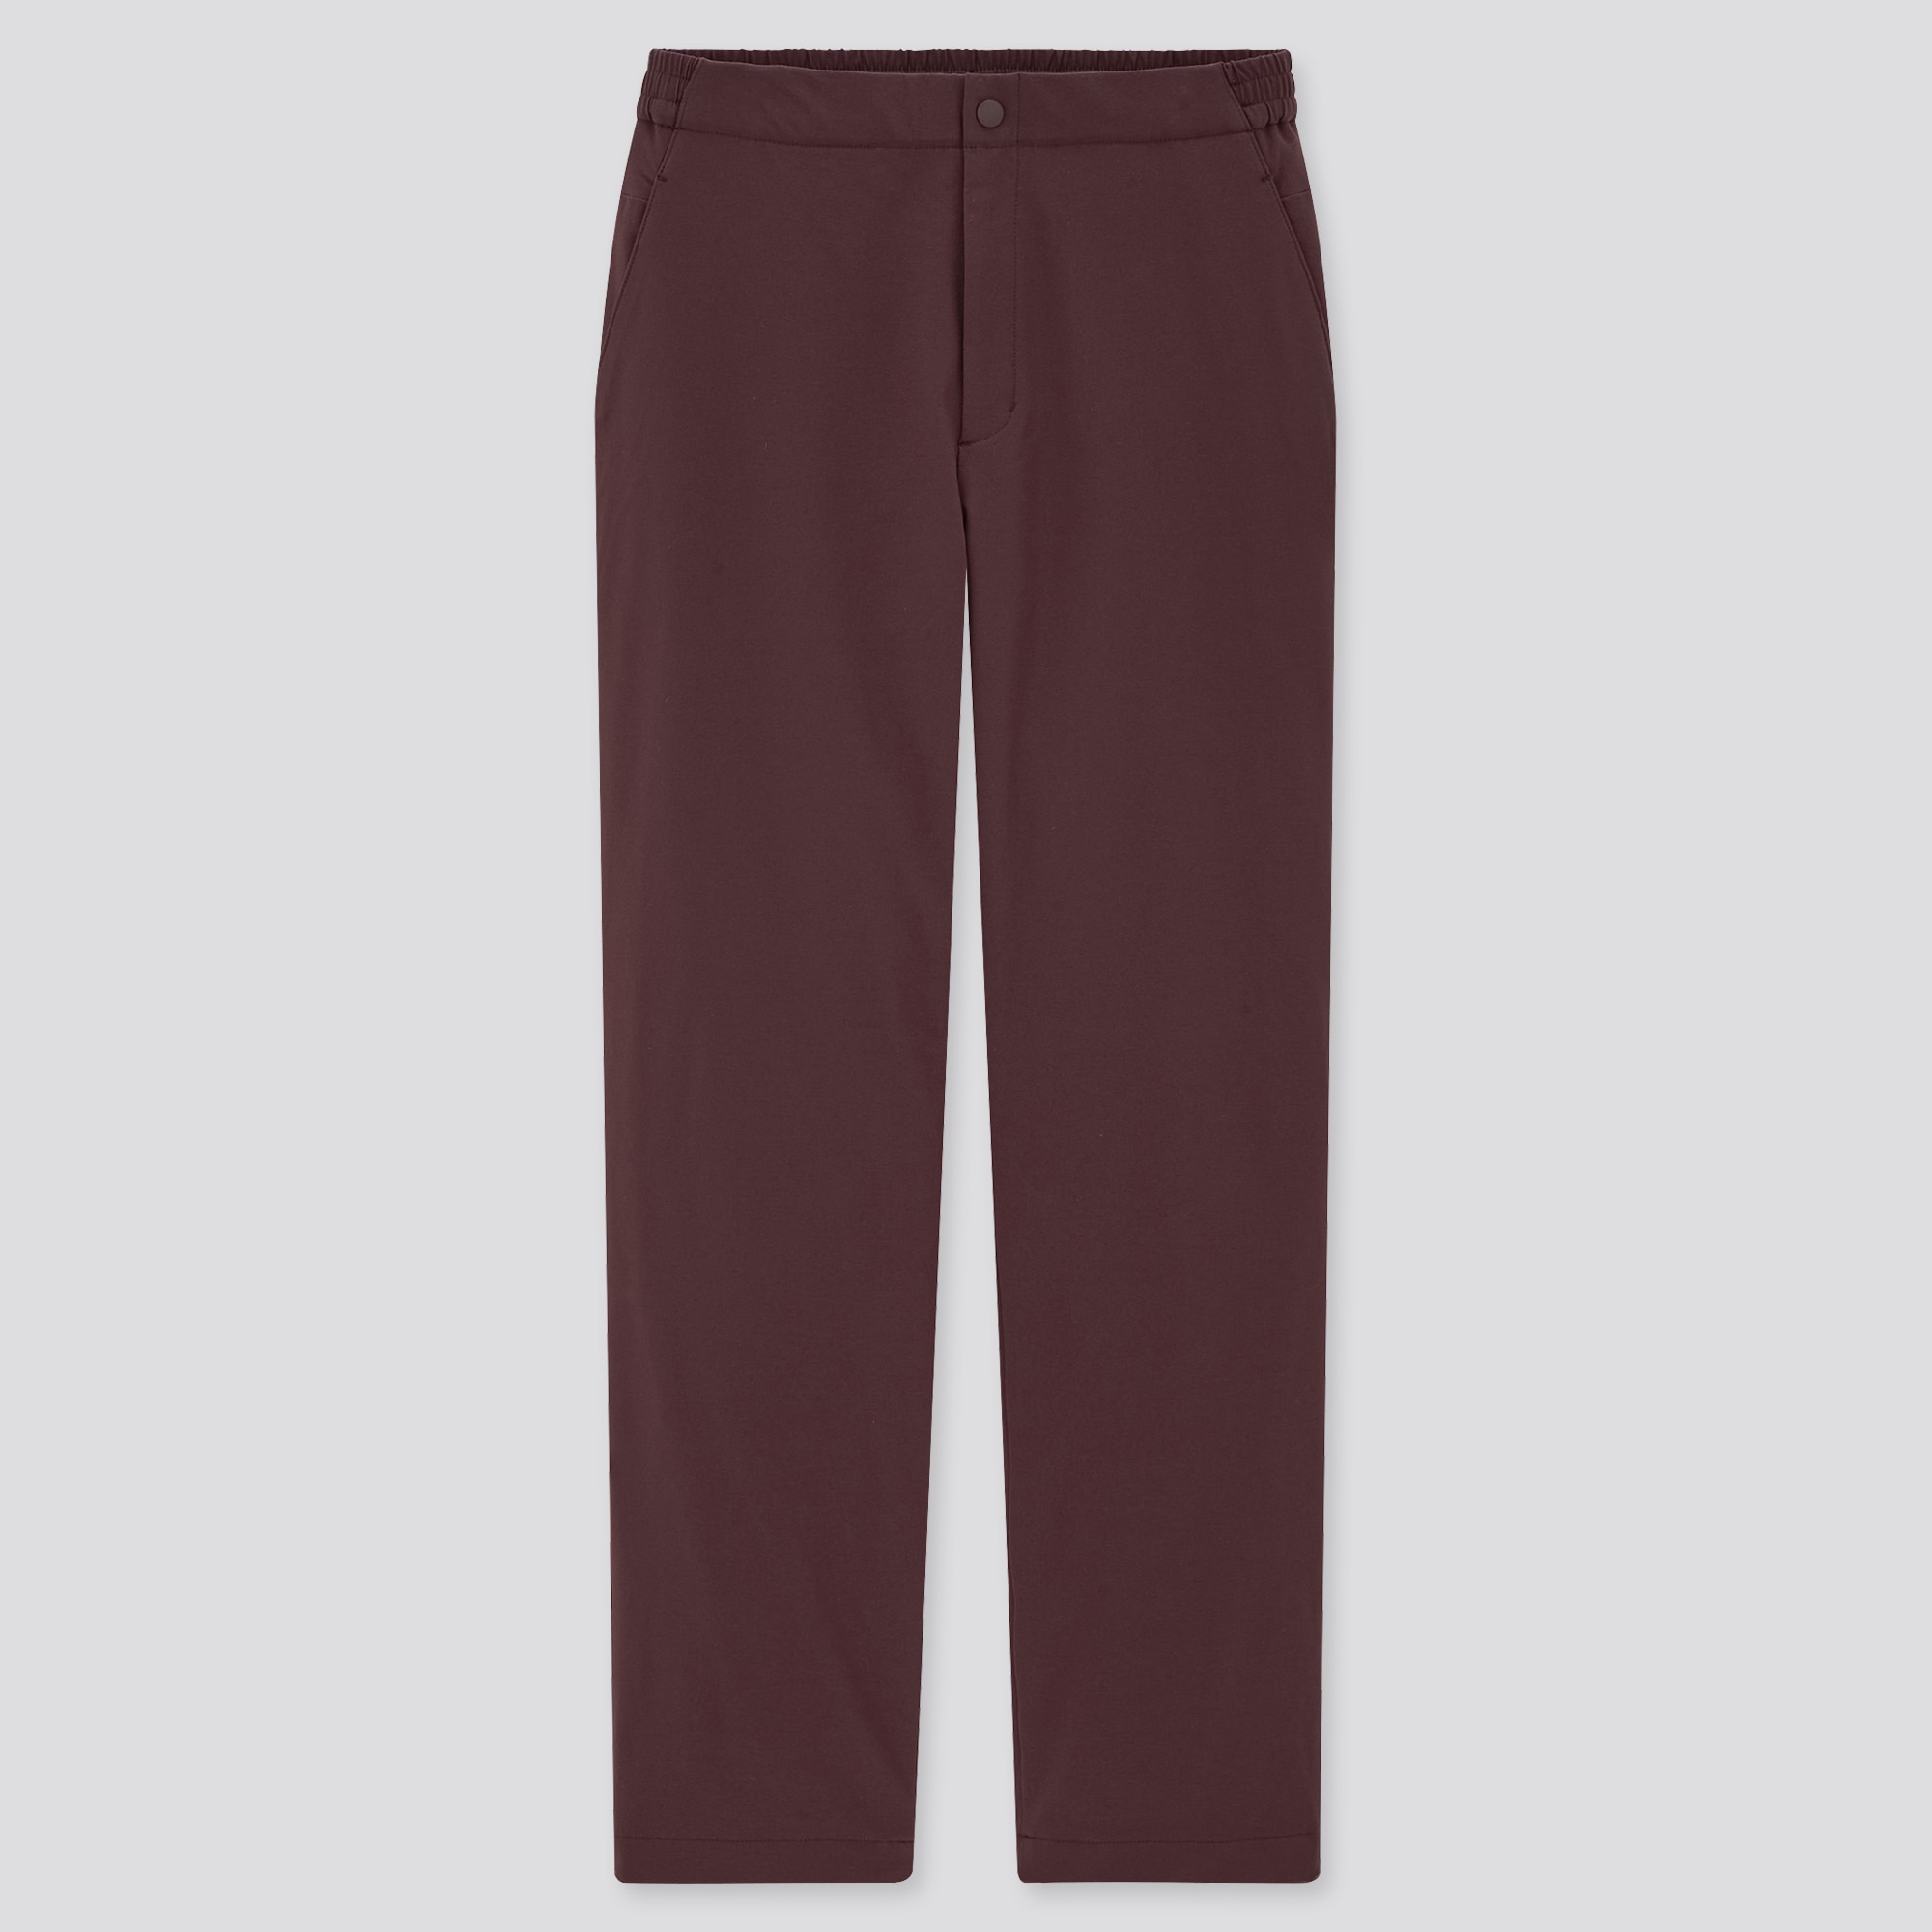 uniqlo thermal jeans